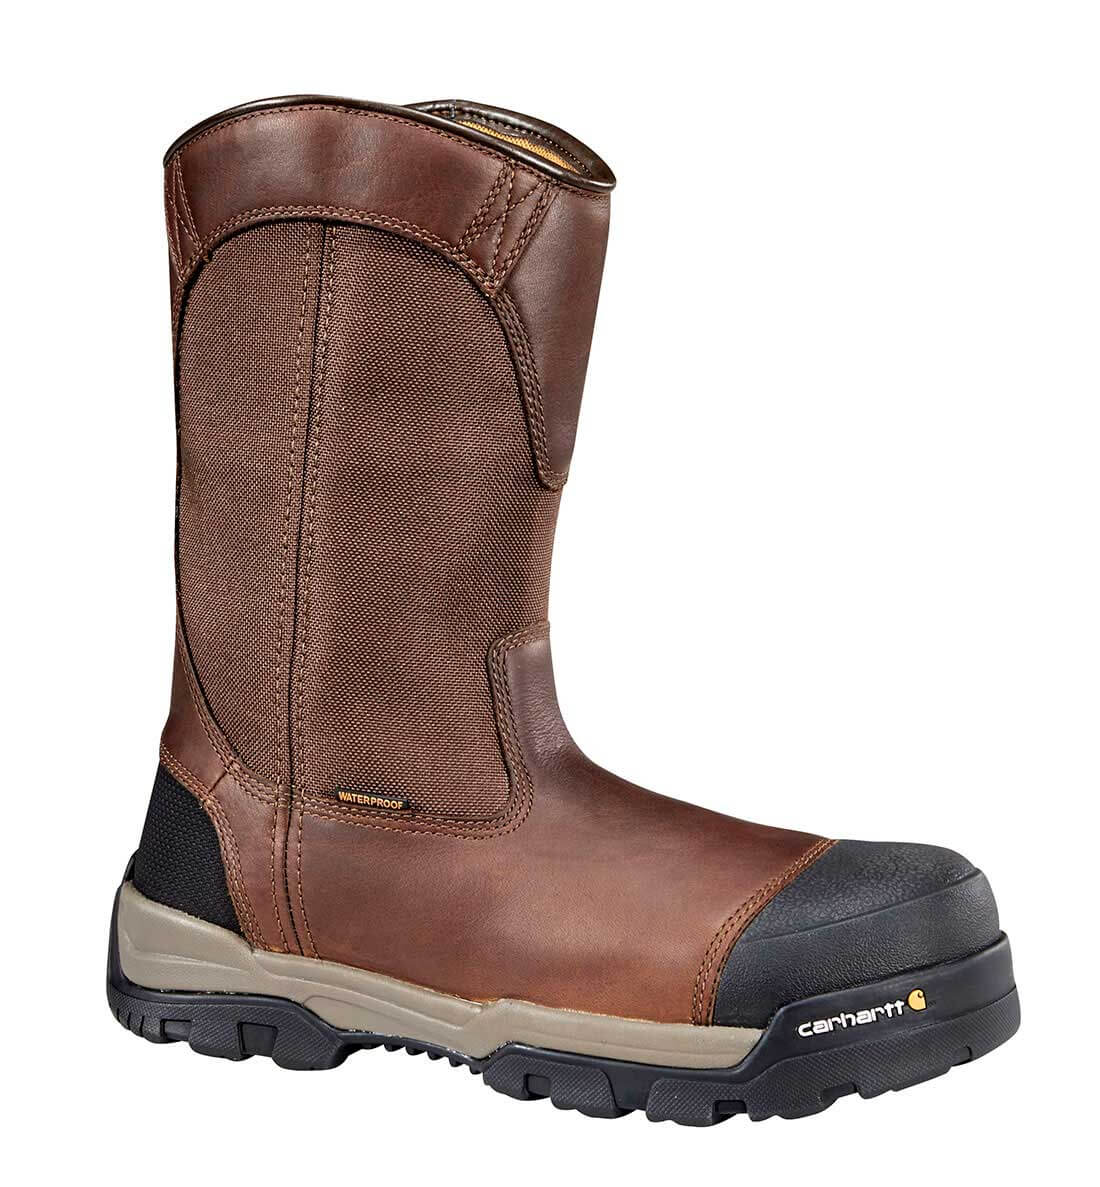 Carhartt - CME1355 -  Men's Ground Force Brown Leather Waterproof Composite Safety Toe 10 Pull-On Work Boot